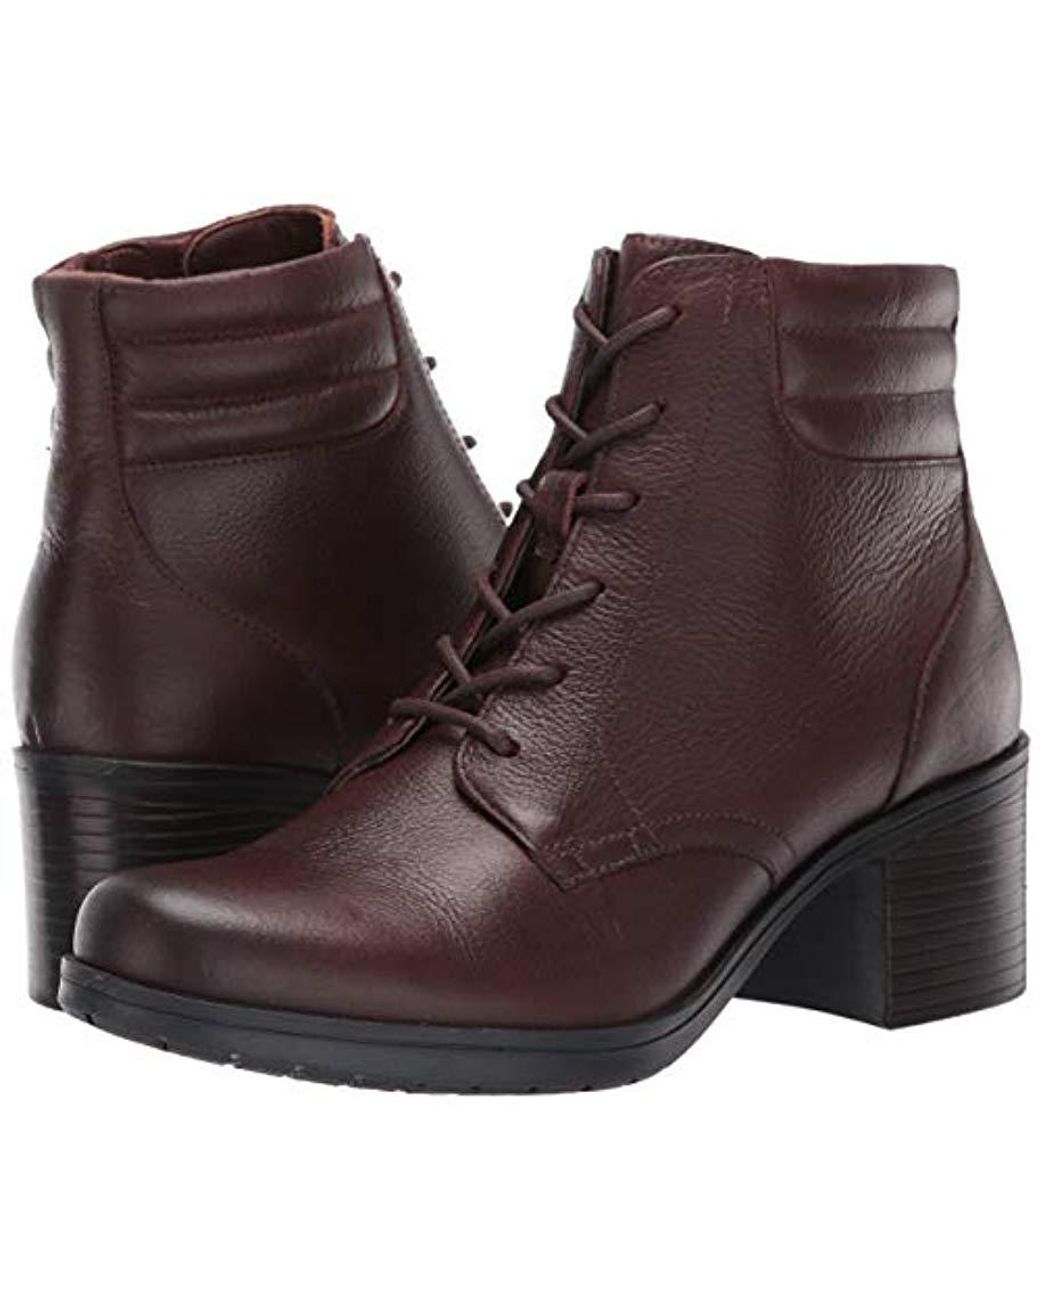 Clarks Rubber Hollis Jasmine Fashion Boot in Mahogany Leather (Brown) | Lyst